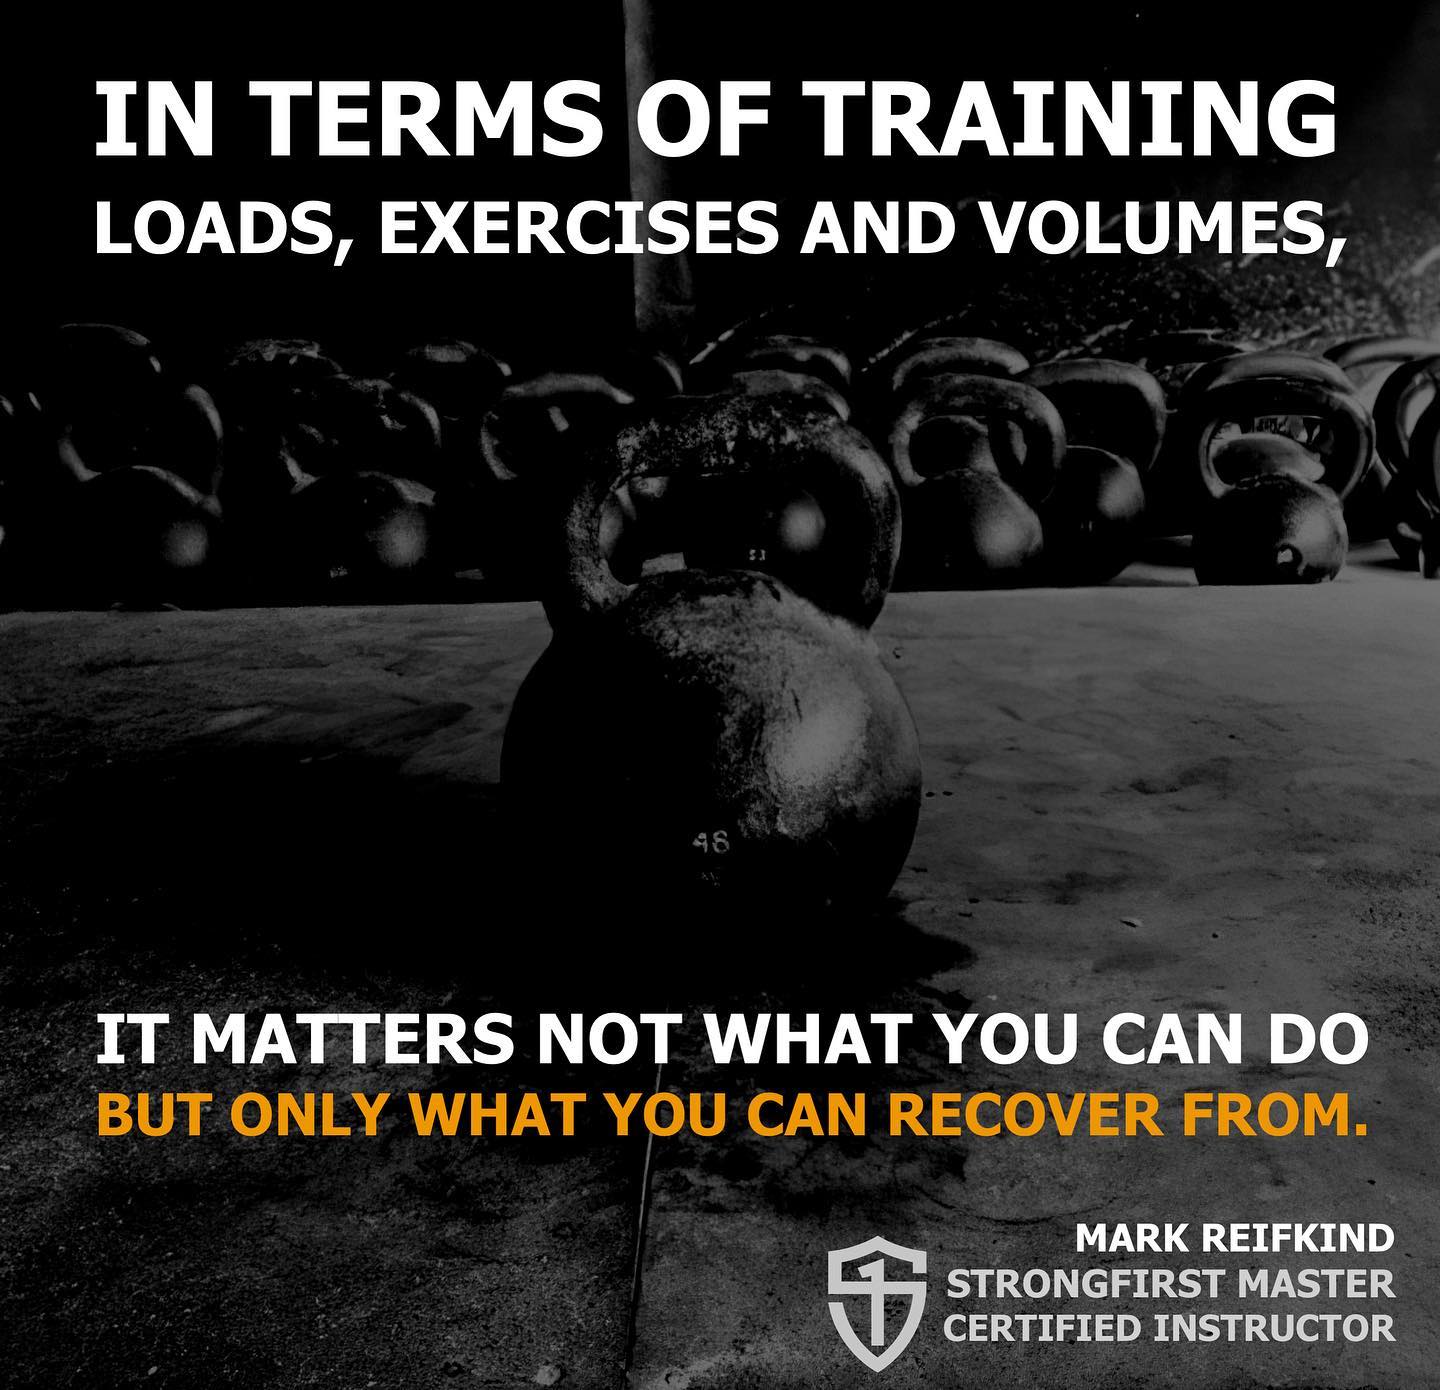 Train smart - be @strongfirst 

#strongfirst #bestrongfirst